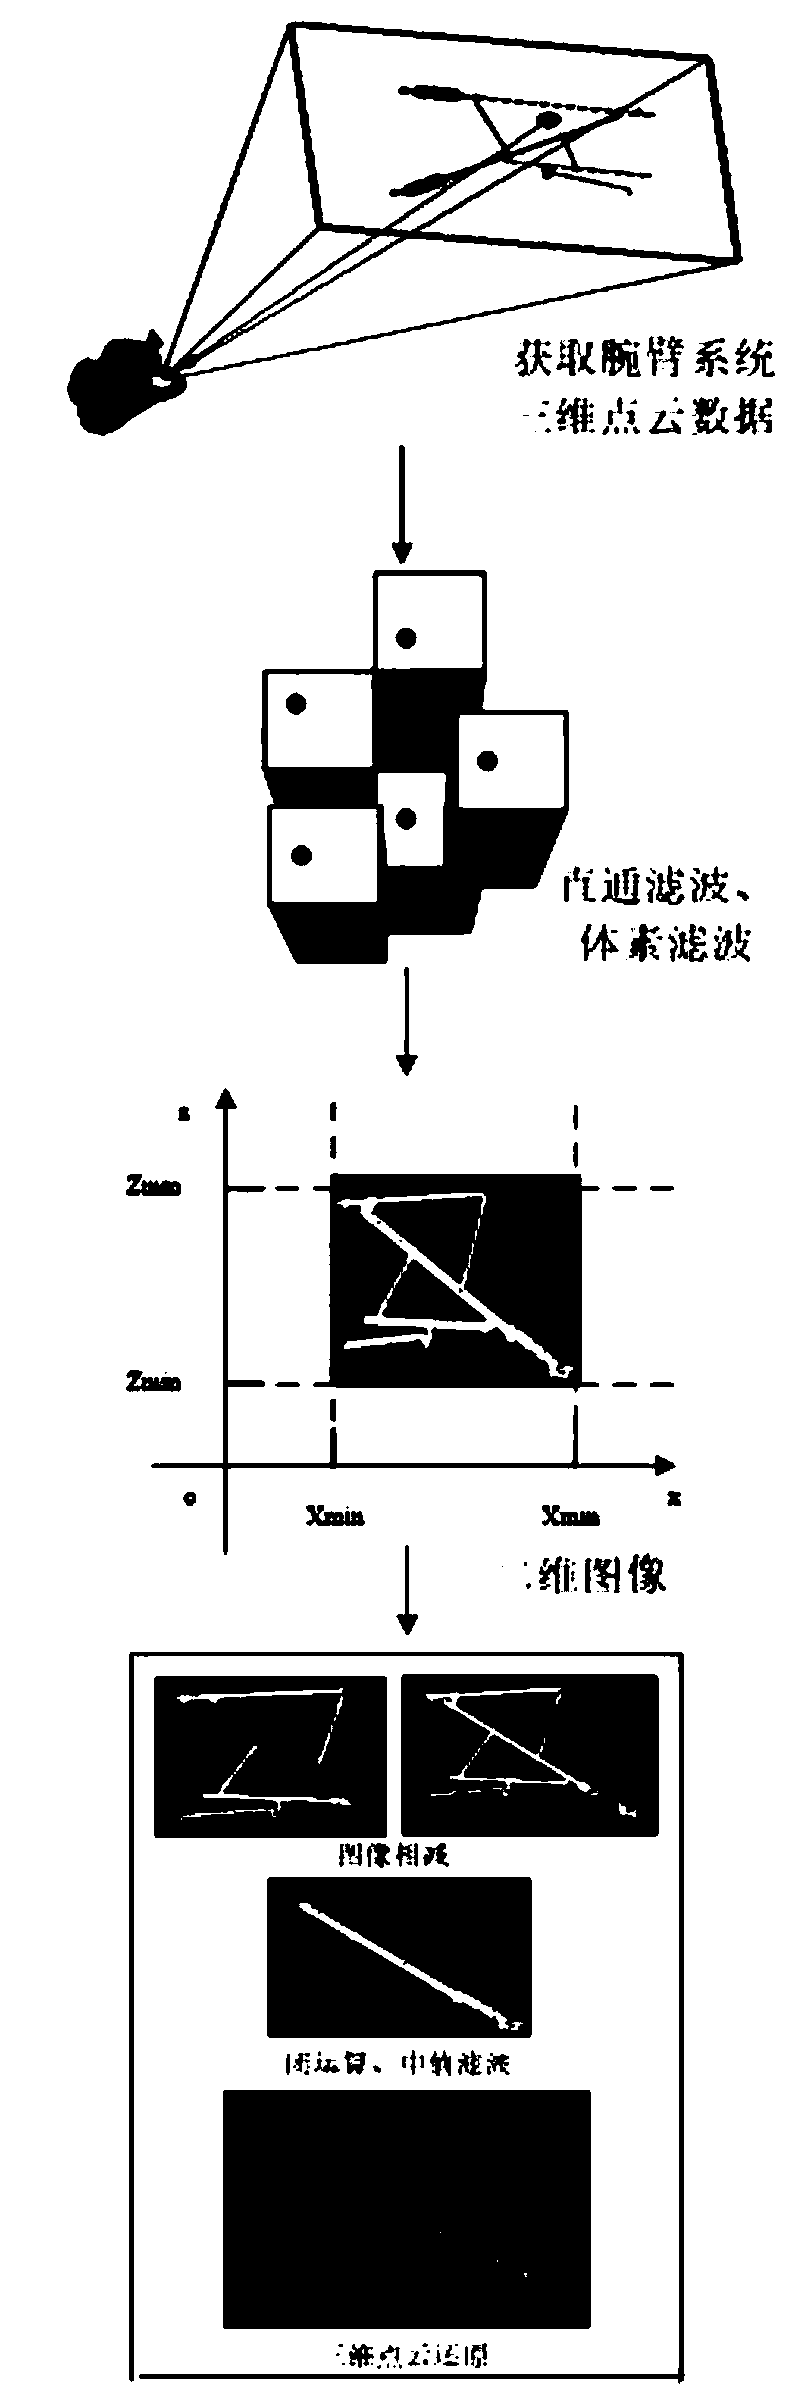 Two-dimensional image auxiliary segmentation method based on three-dimensional point cloud of contact network cantilever system